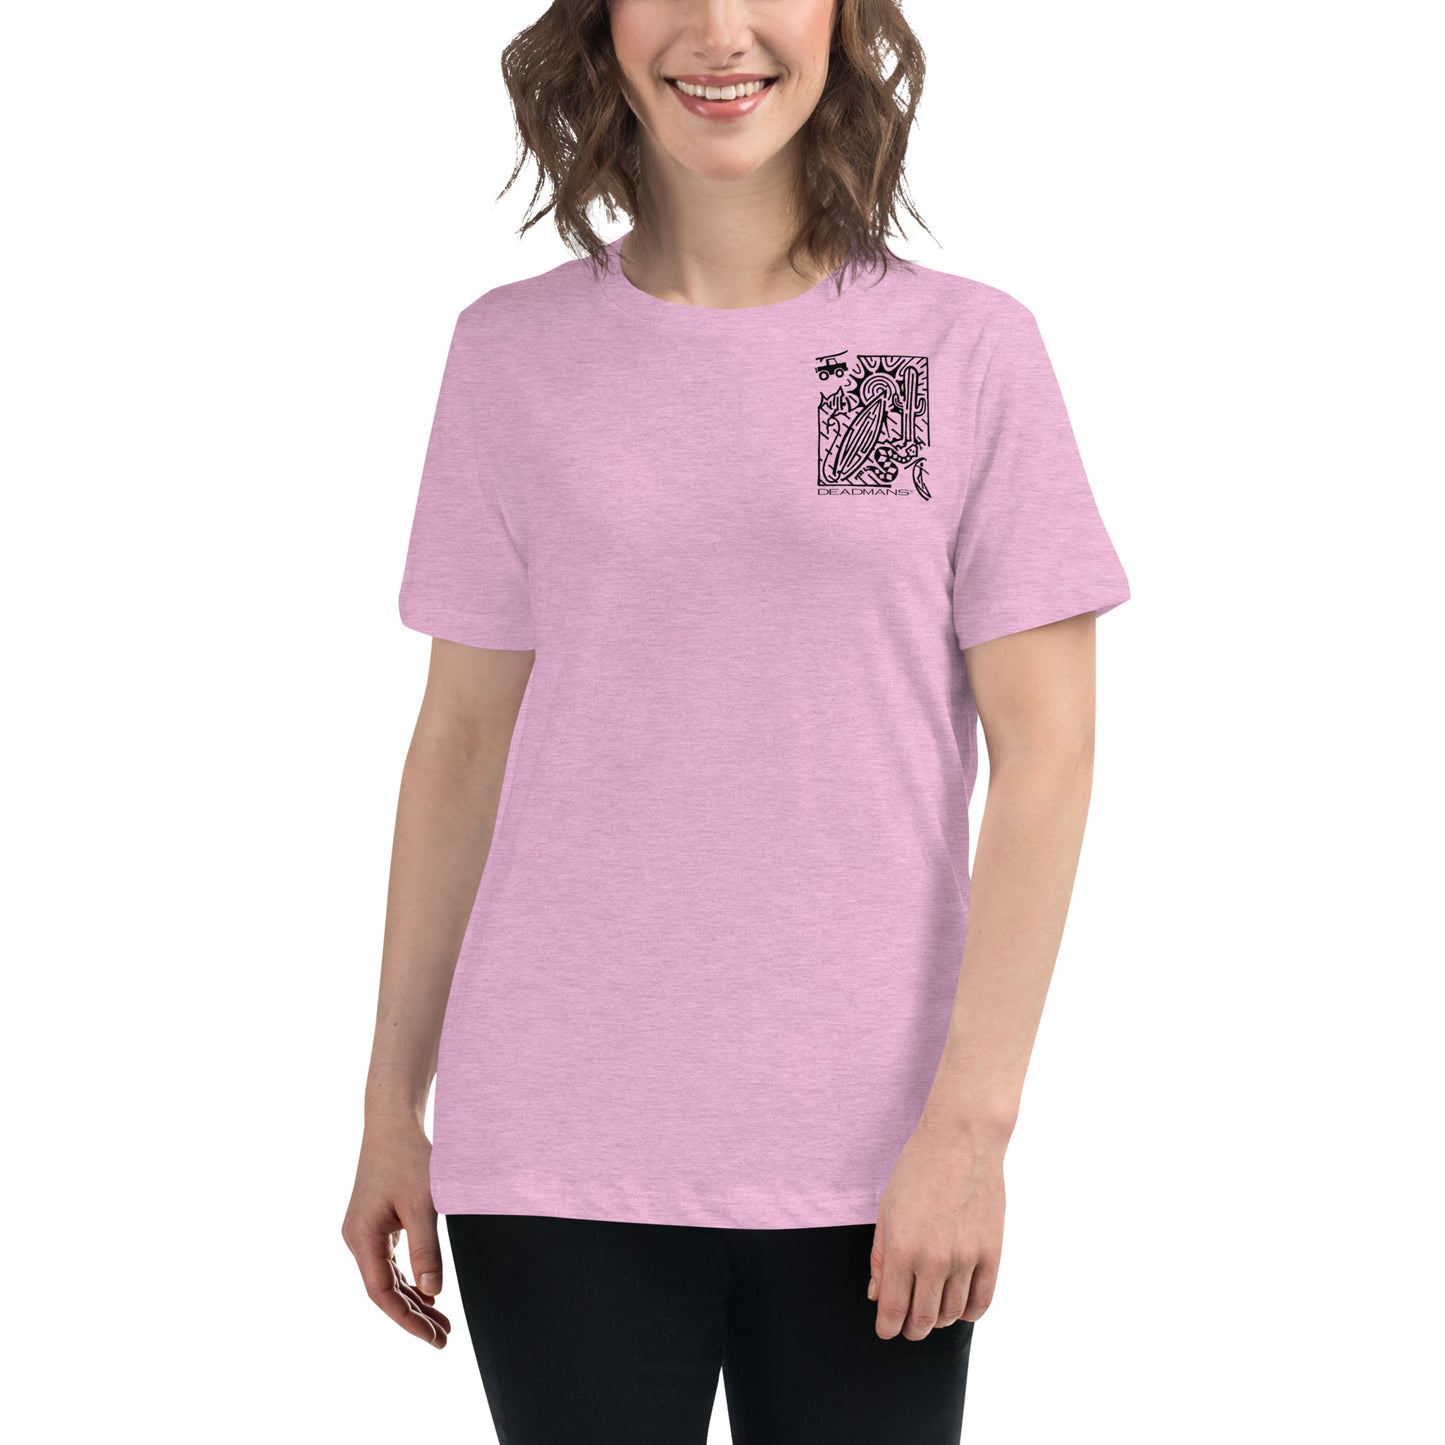 Women's Relaxed T-Shirt - Pray for Surf